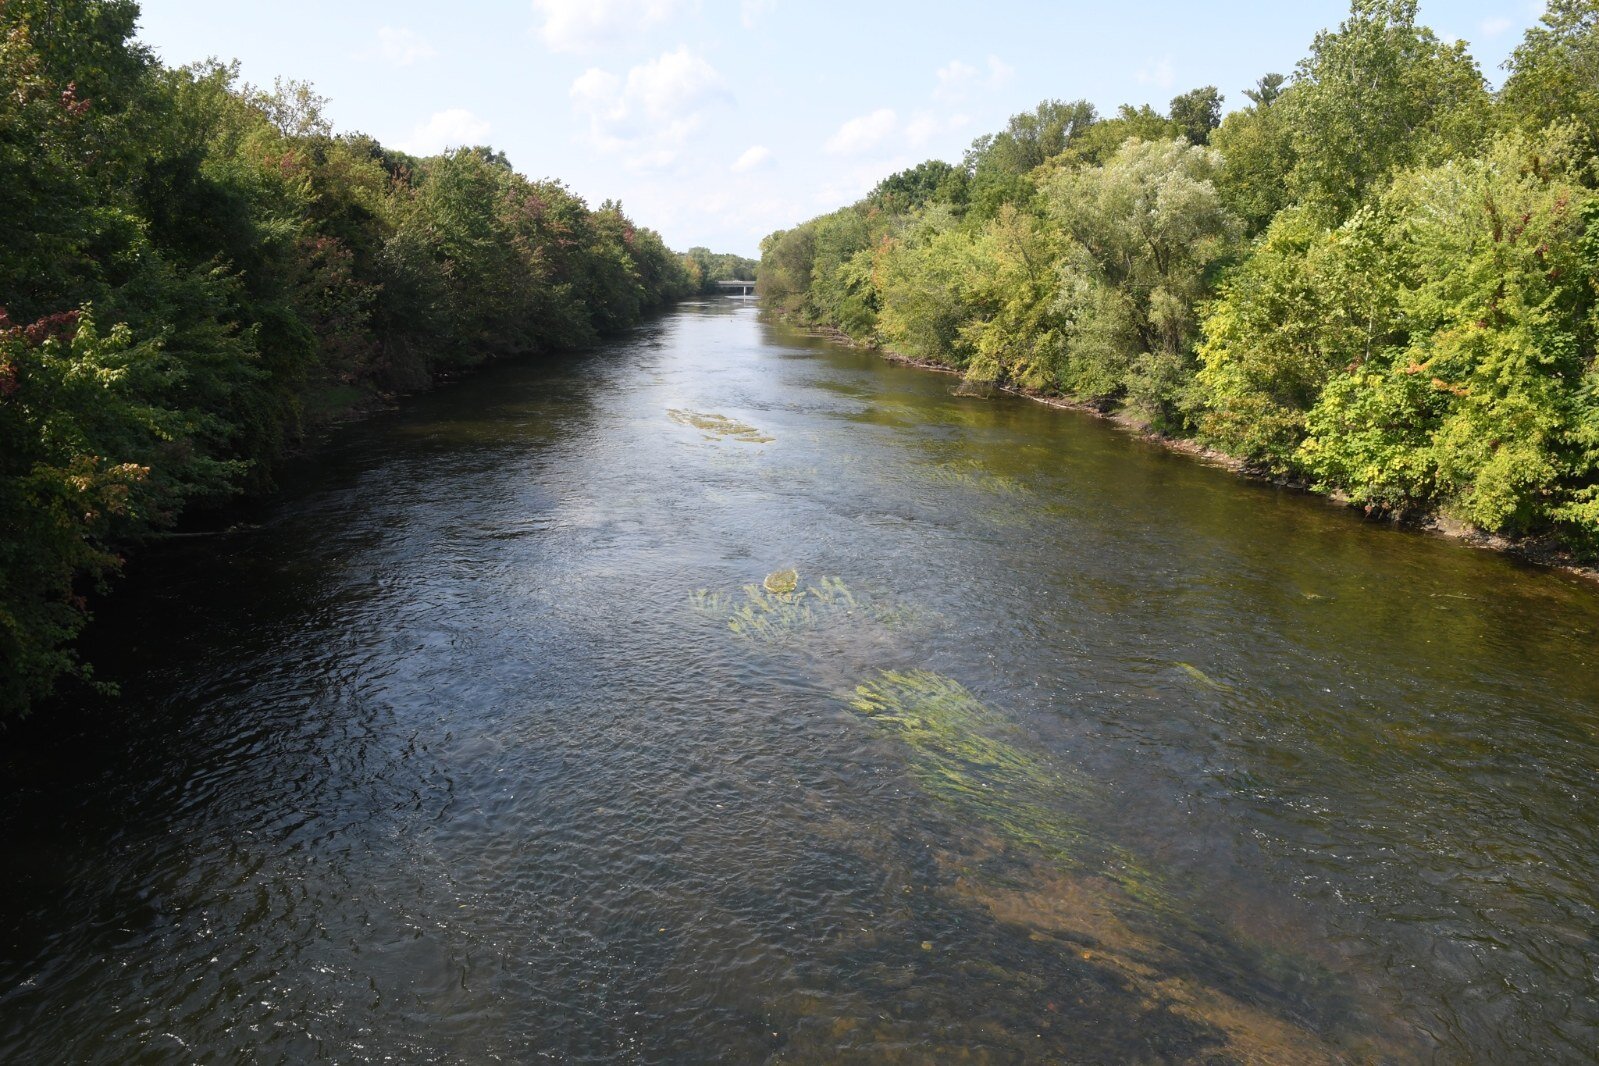 Looking west along the Kalamazoo River from Kendall Street.